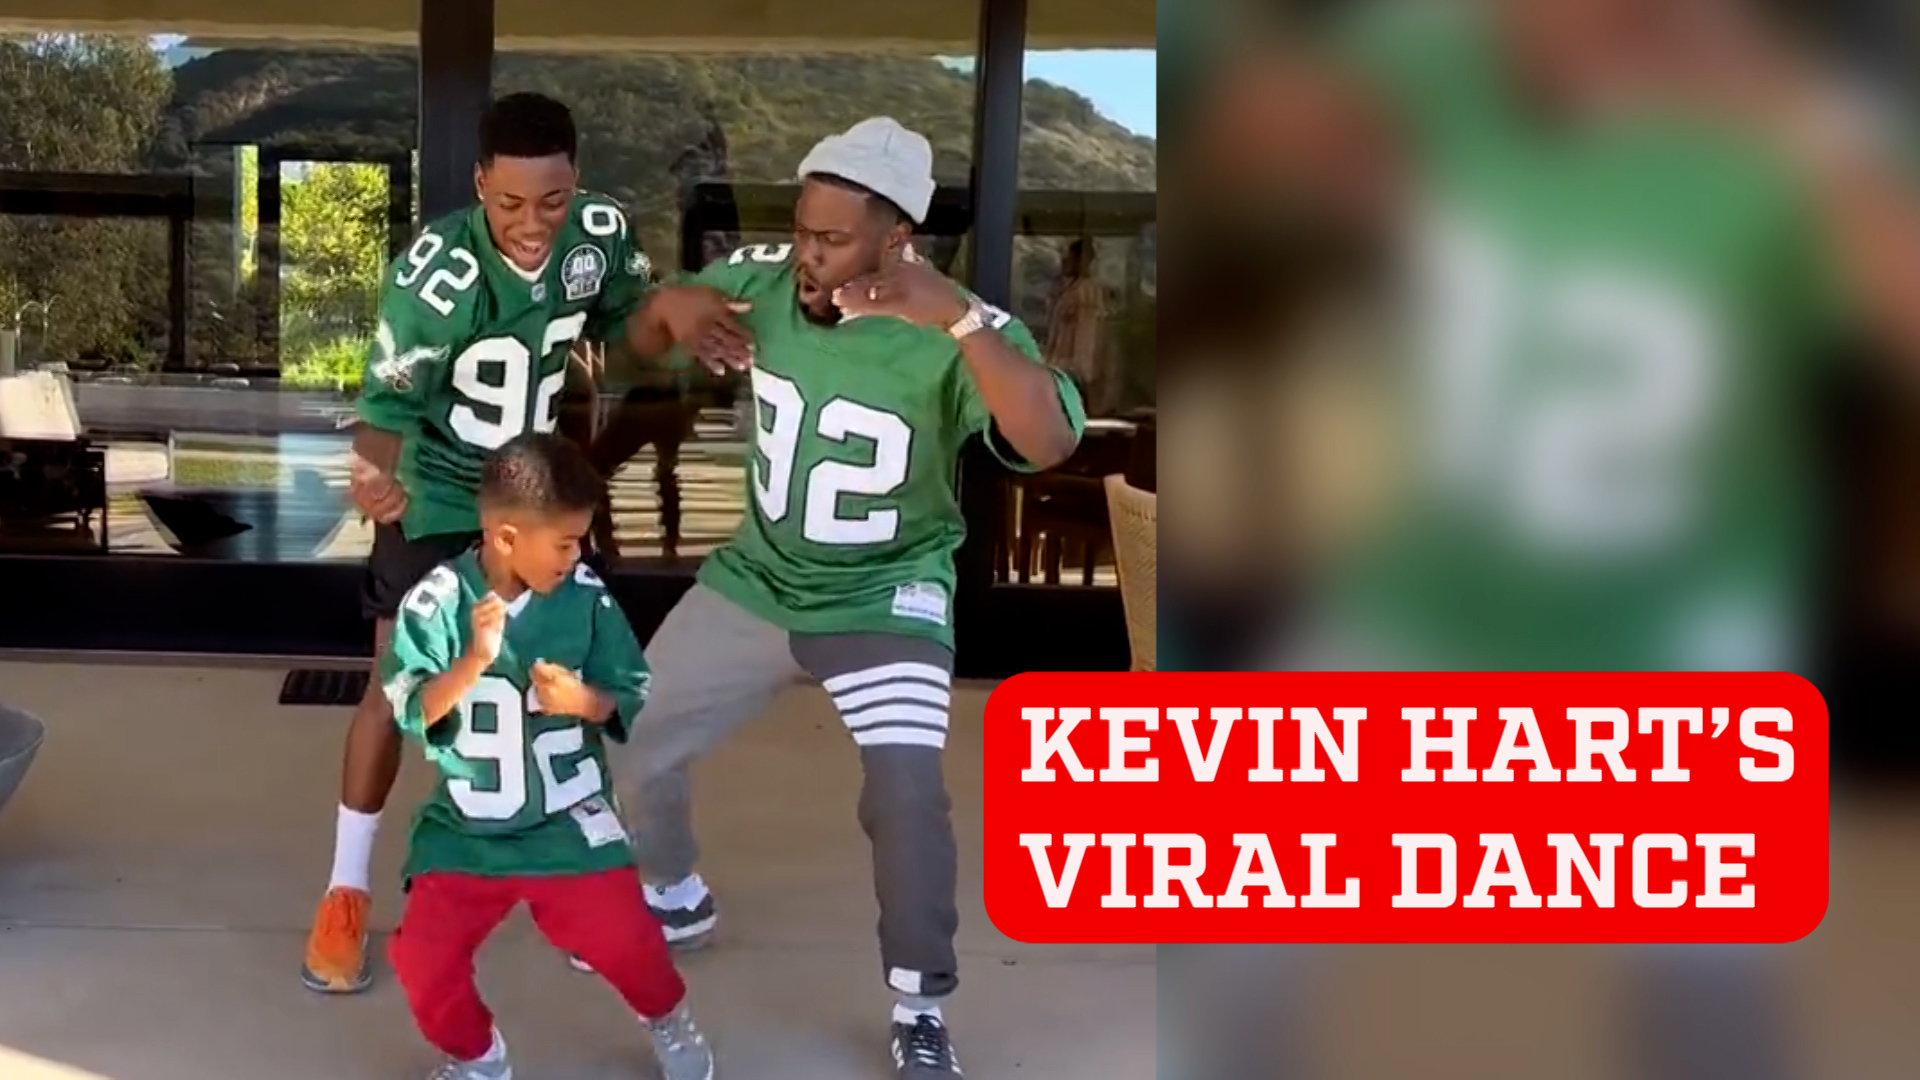 Kevin Hart trolls Cowboys after their loss to the Eagles with epic viral dance